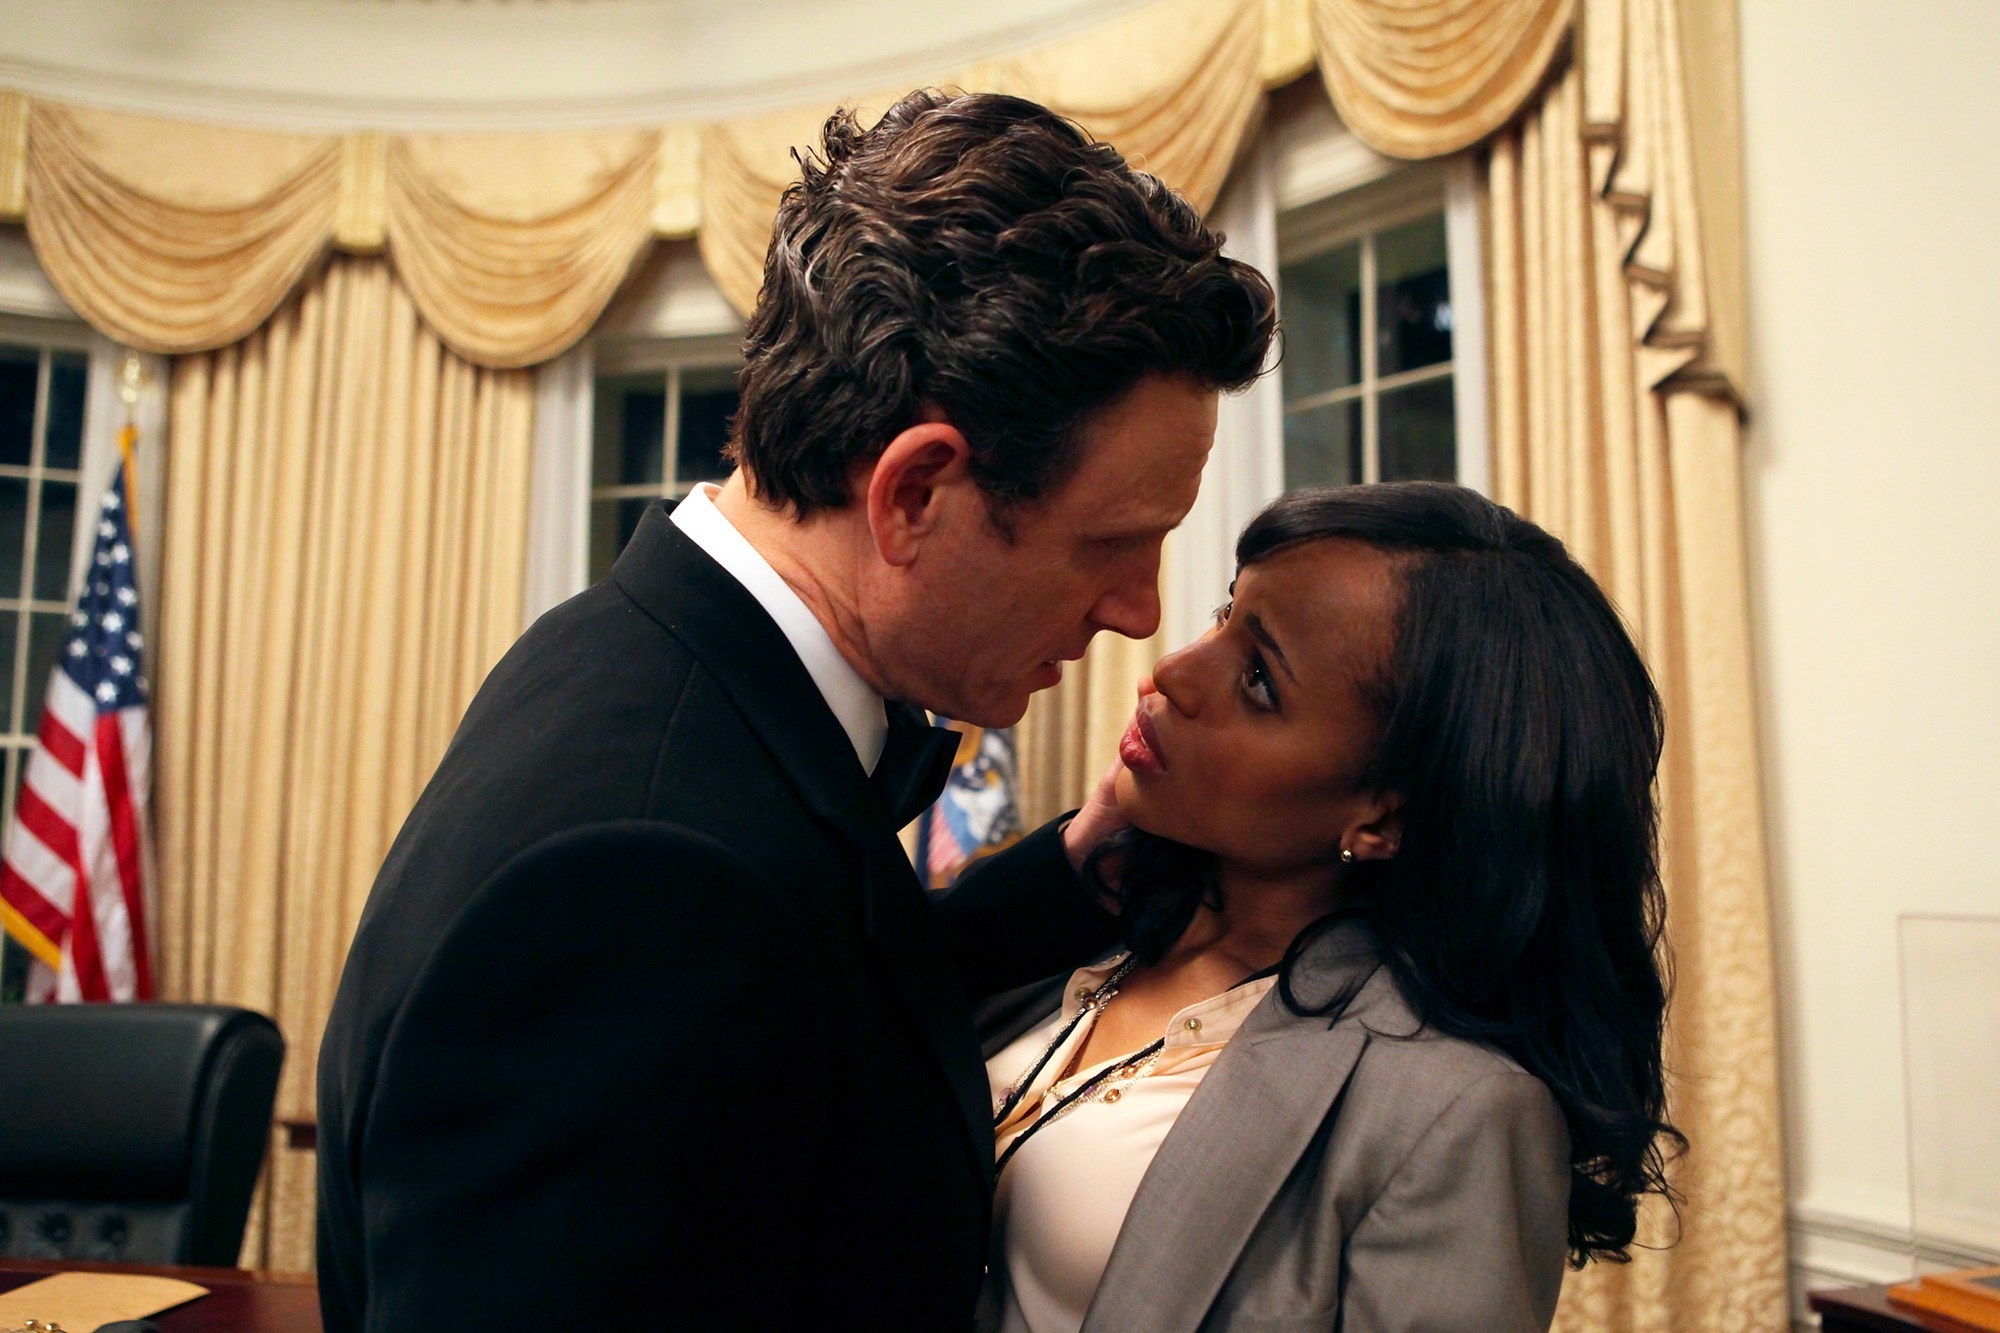 A worthy Shonda Rhimes follow up to Grey's Anatomy, Scandal gifted us ...